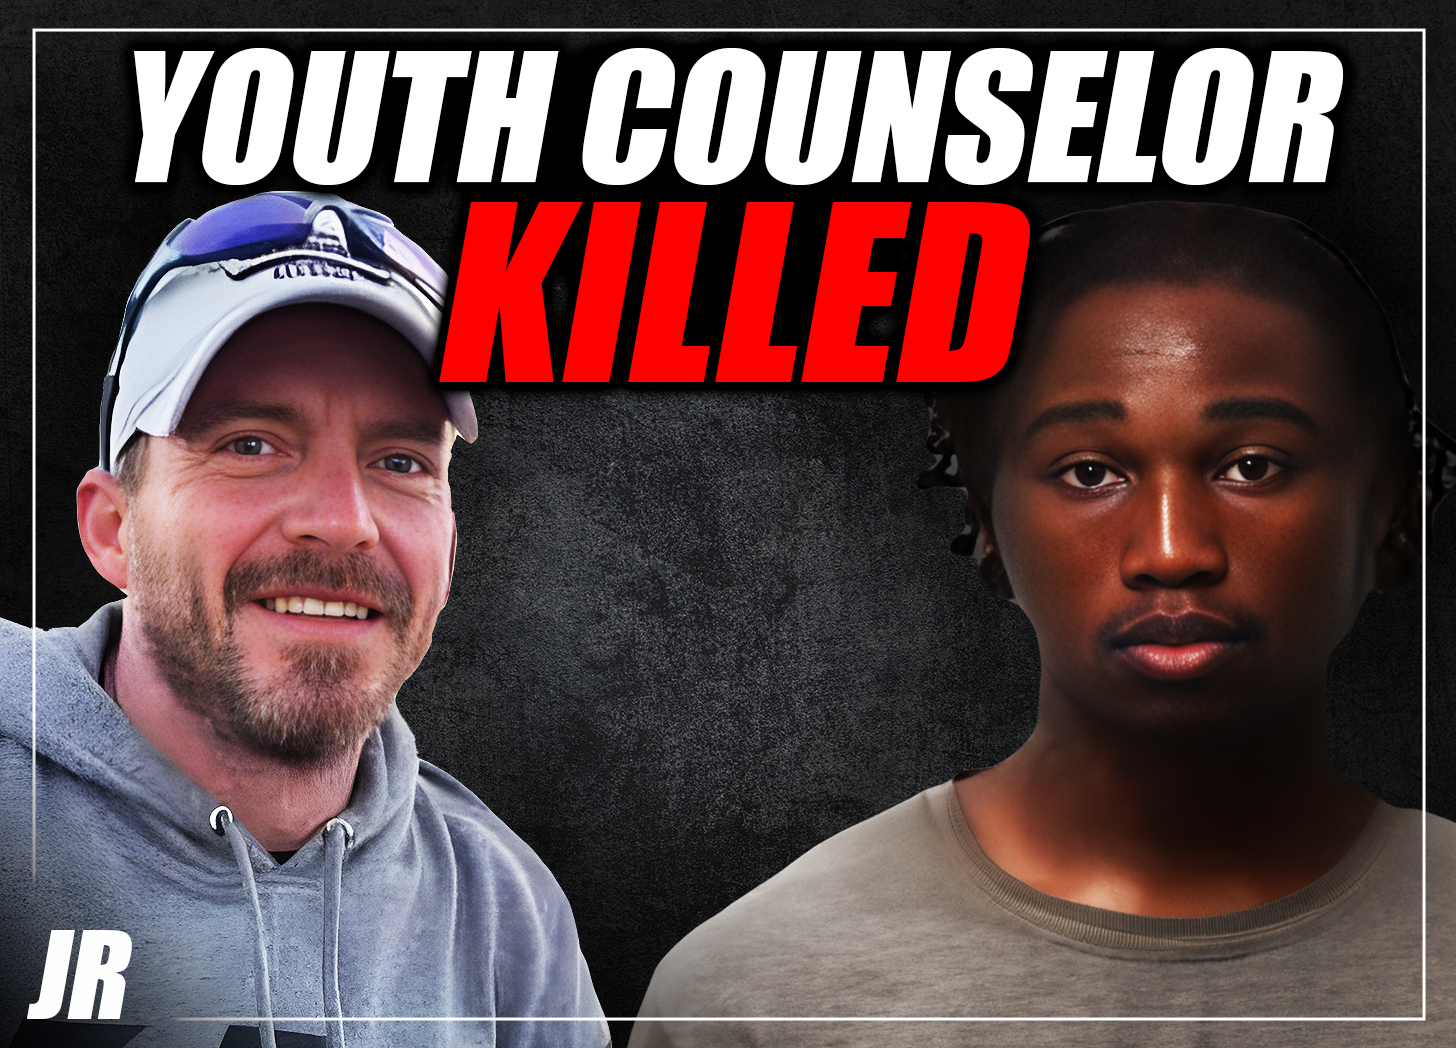 Black teen charged with killing White youth counselor in brutal prison assault